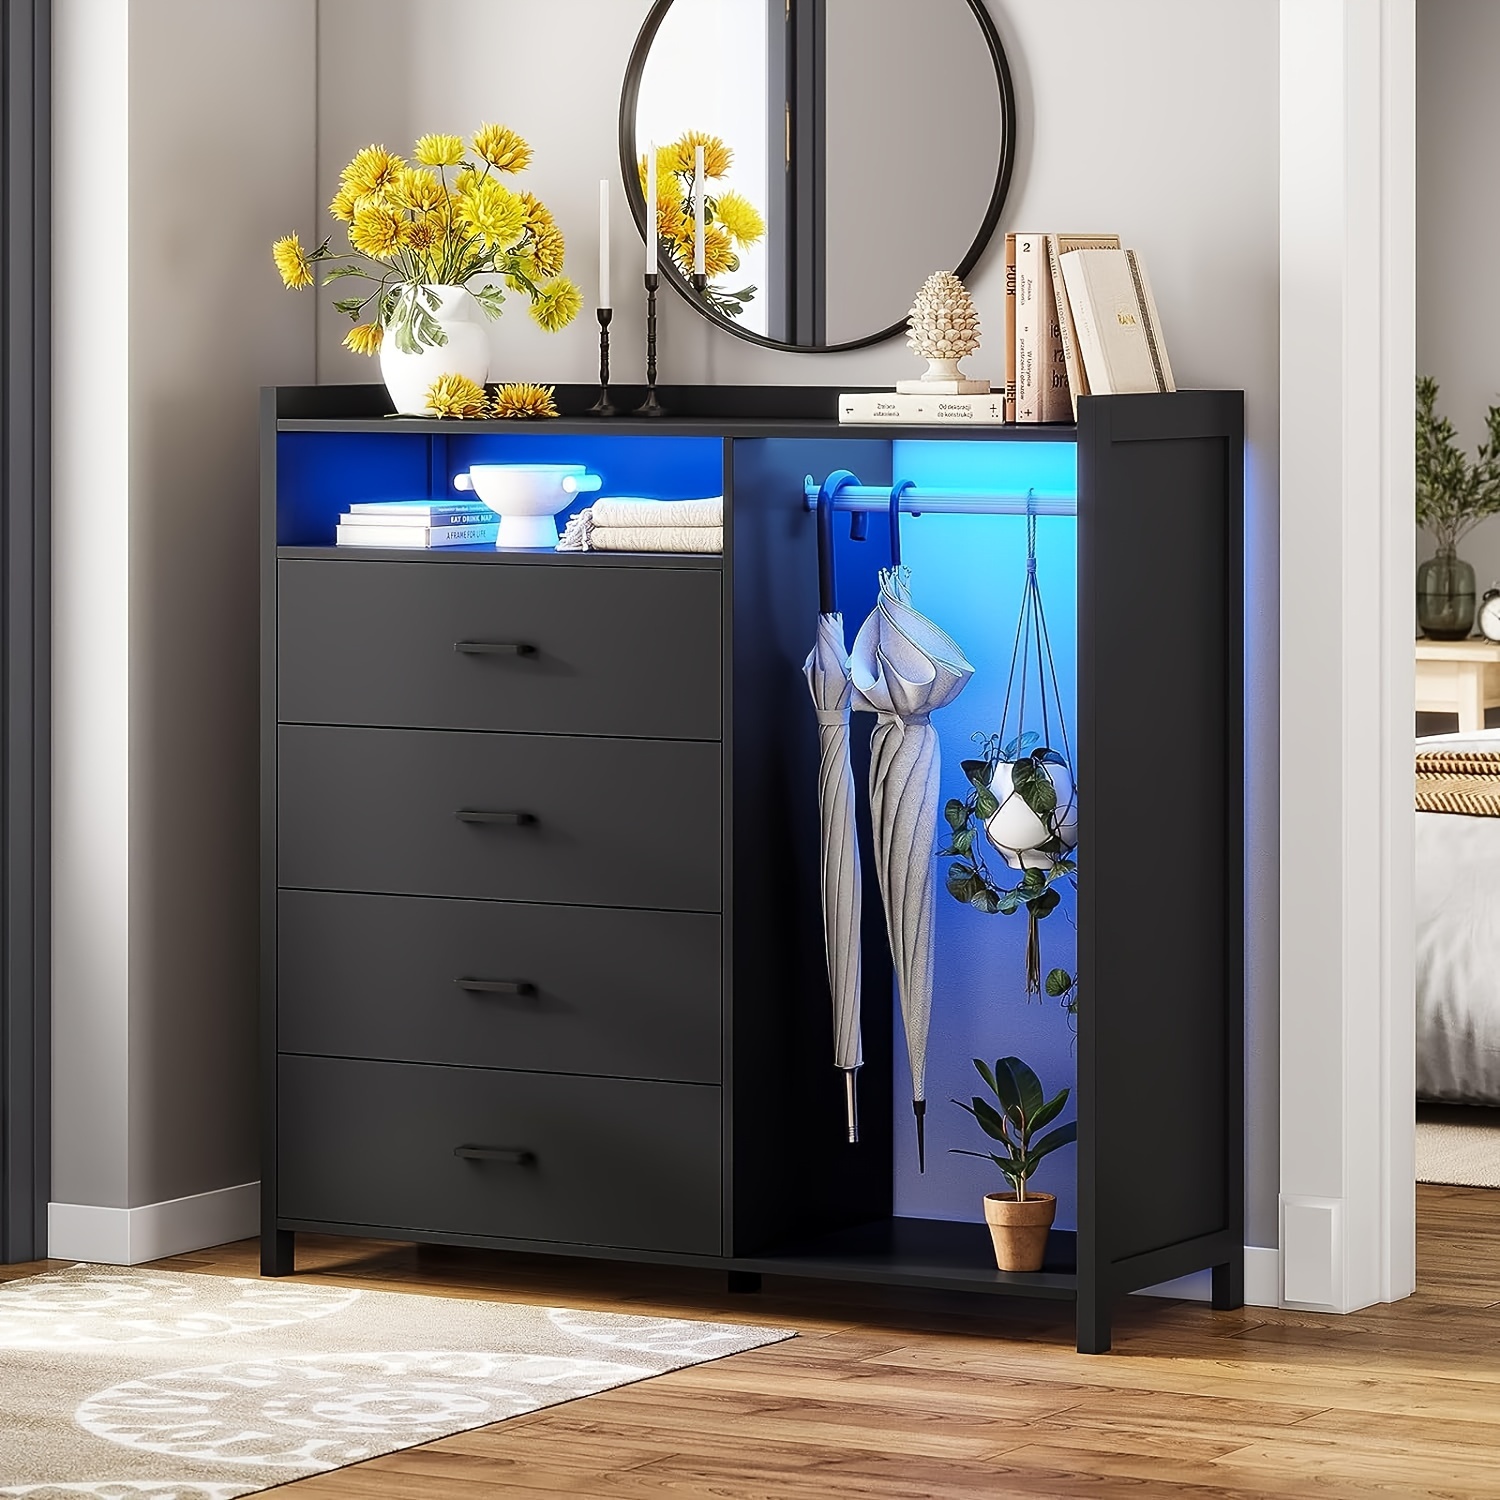 

4 Drawers Dresser With Led Lights For Bedroom, Chest Of 4 Drawers With Clothesrail, Modern Black Dresser With Open Storage Space For Bedroom Entryway